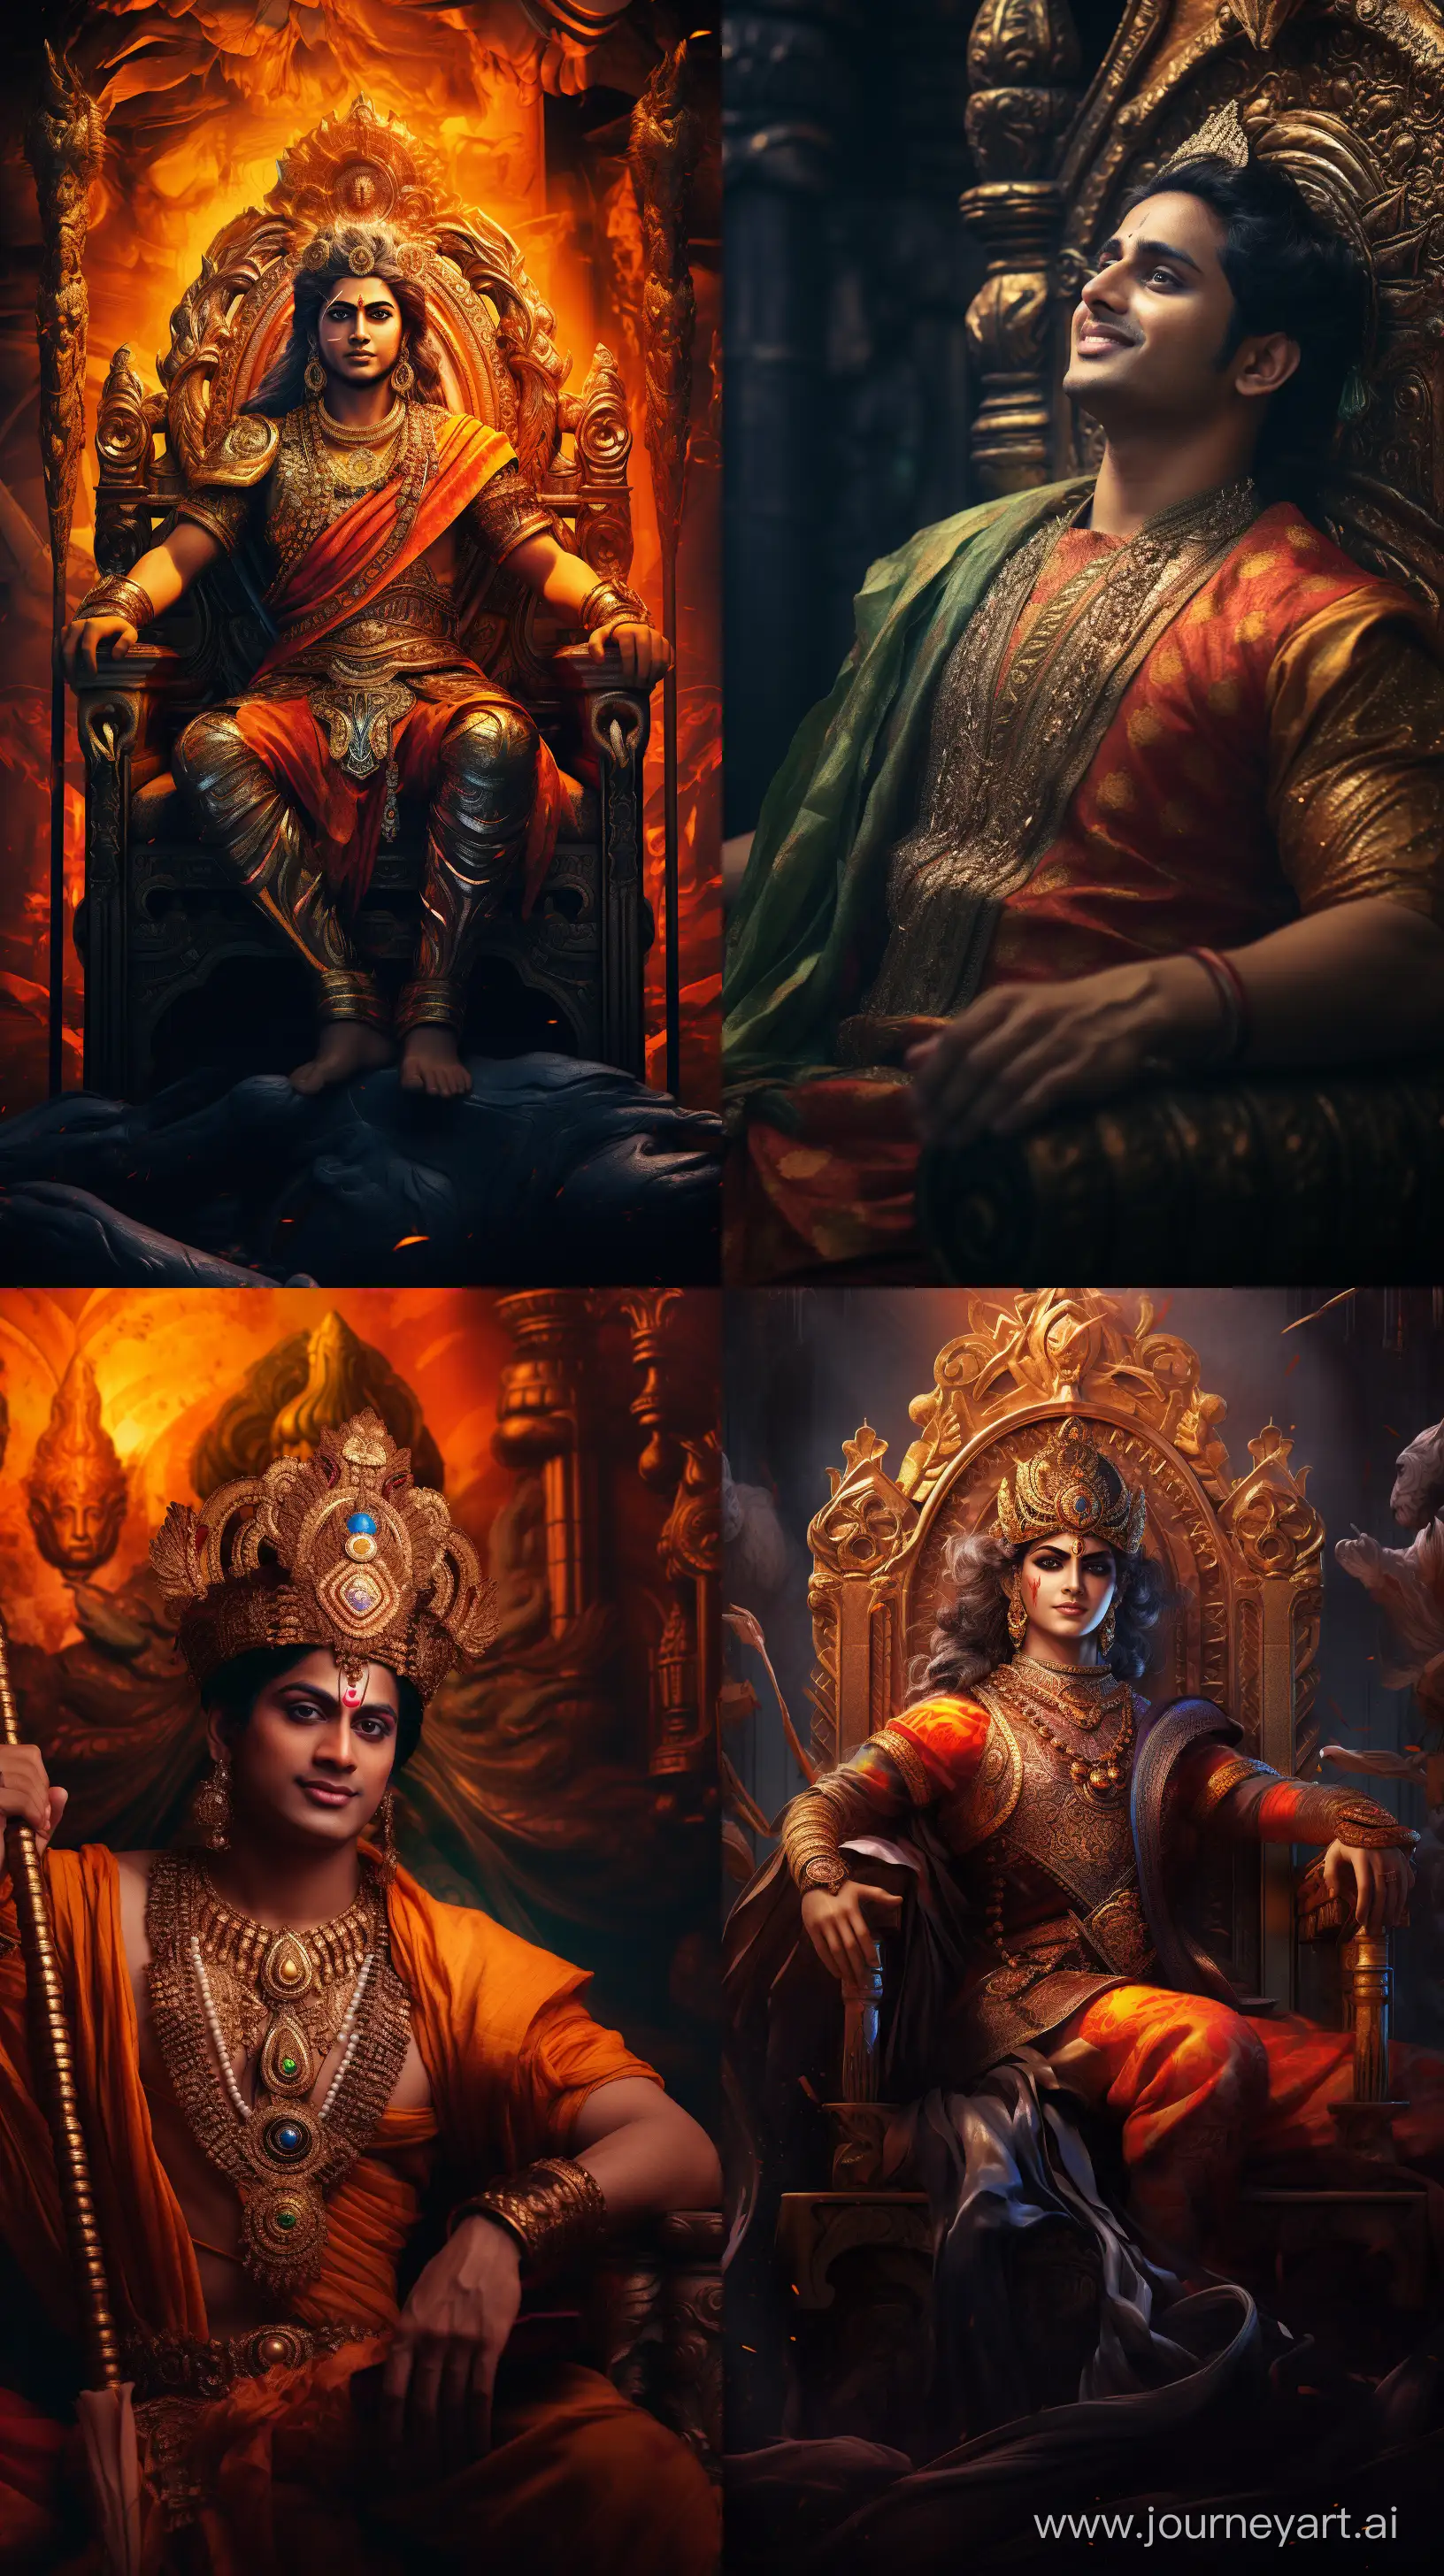 Realistic-Colorful-Depiction-of-Lord-Rama-Laughing-on-Throne-with-Tears